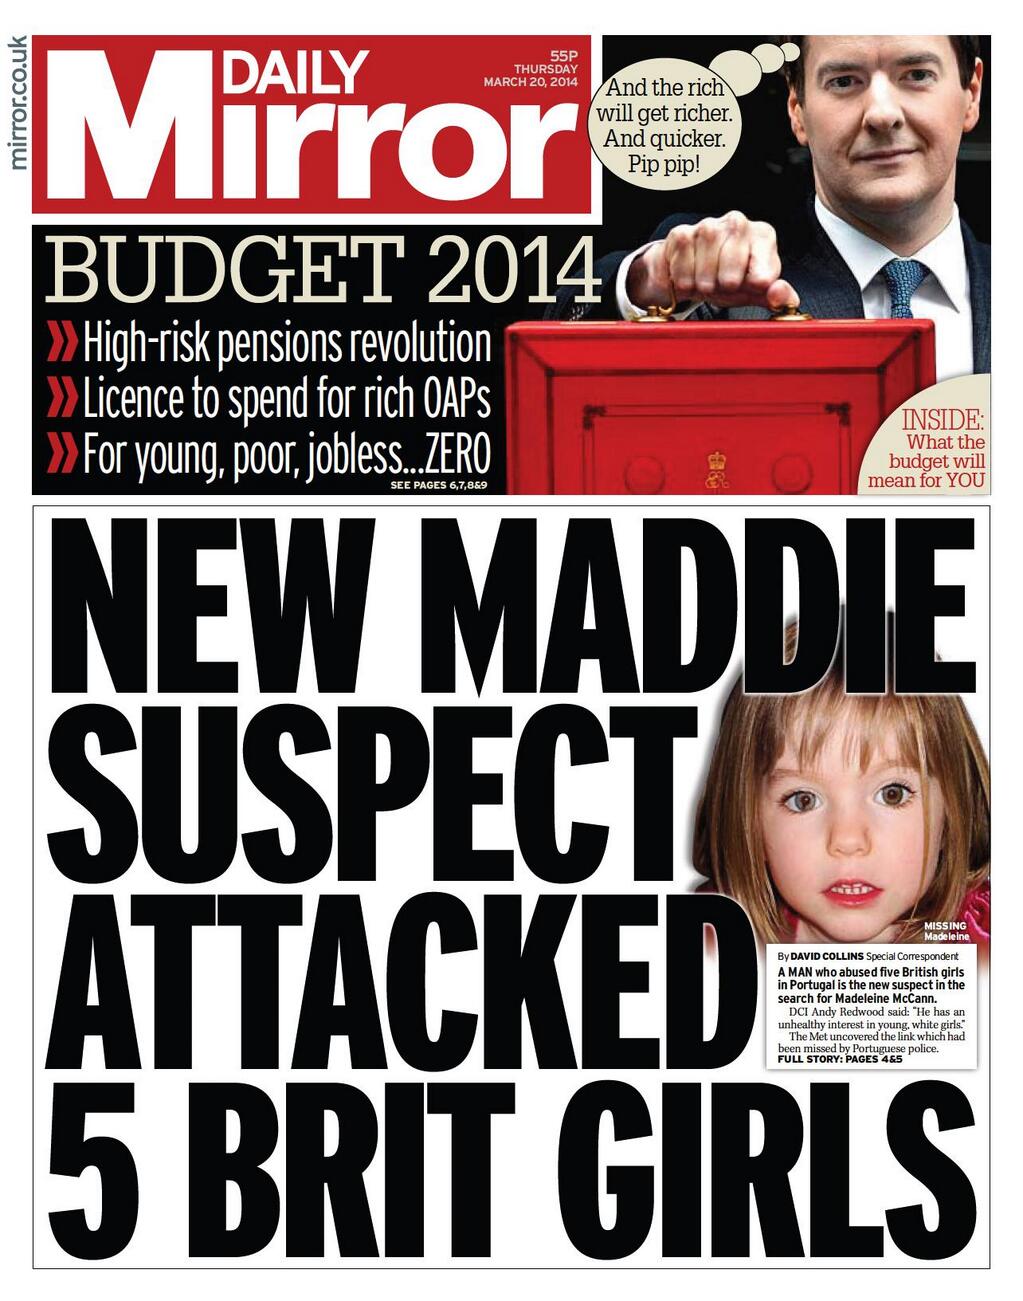 Daily Mirror, 20 March 2014